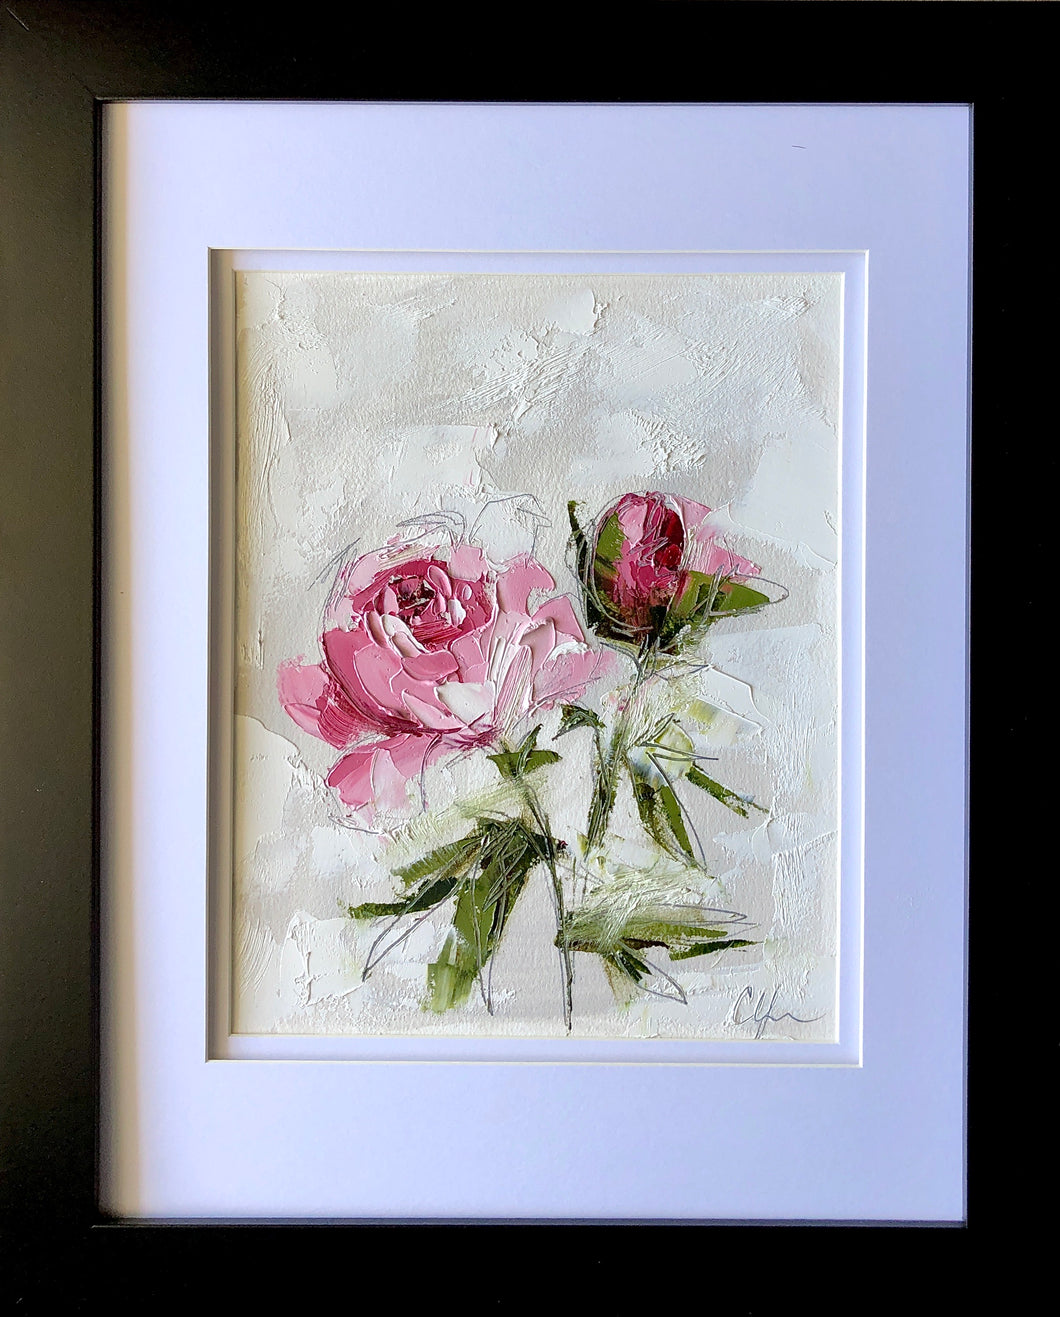 “Peony Vignette XII” 10x8” Oil/Graphite on Paper